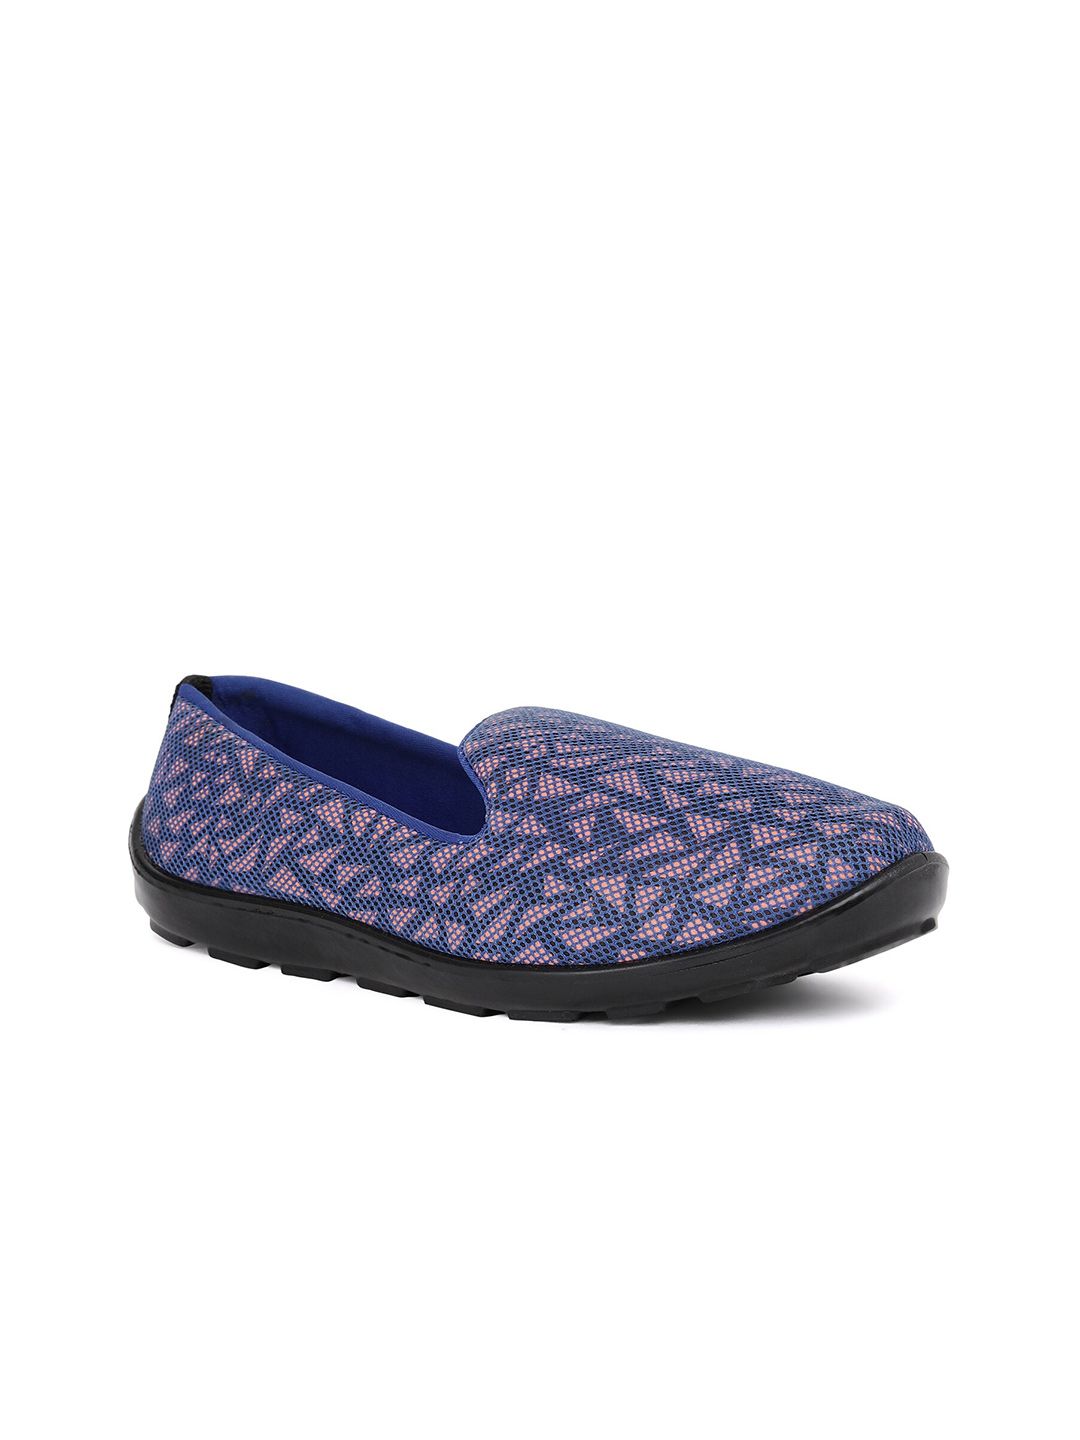 Paragon Women Blue Printed Loafers Price in India